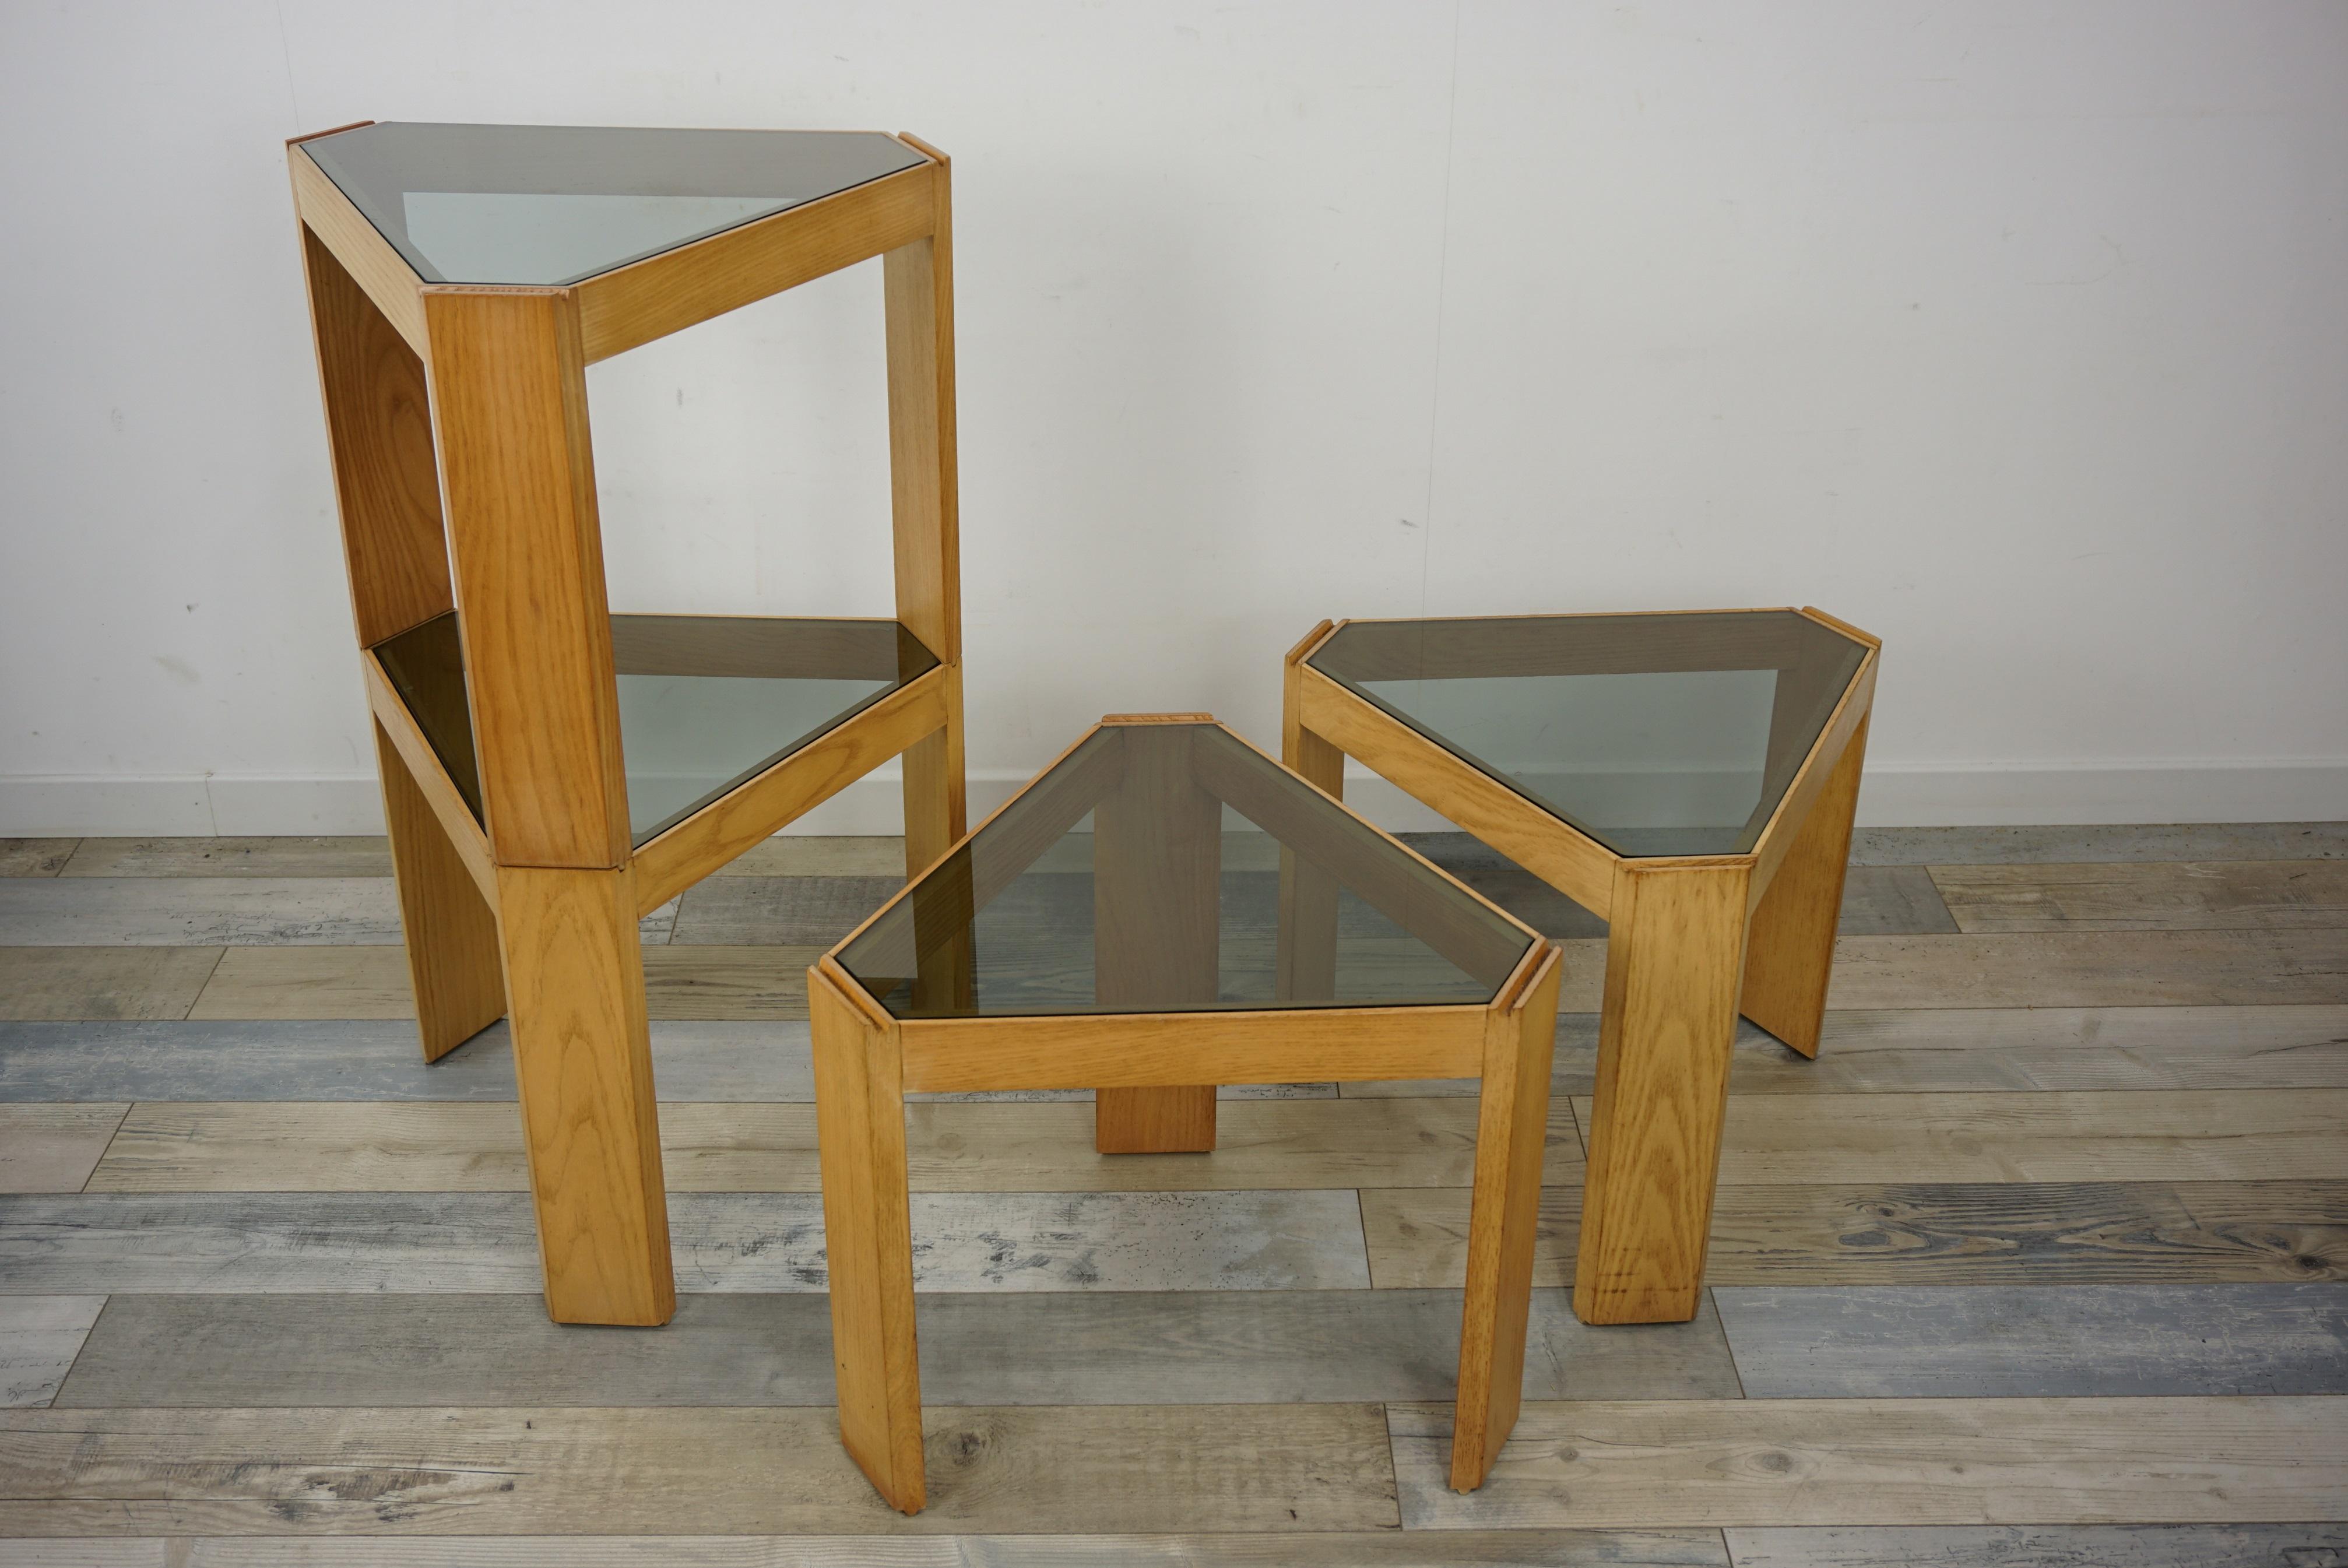 1970s Italian design set of 4 modular tables from Porada Arredi: Set of 4 triangular, stackable and modular tables, Tony model, composed of a triangular structure in ash decorated with a smoked triangular glass. Ingenious, each table has grooves to